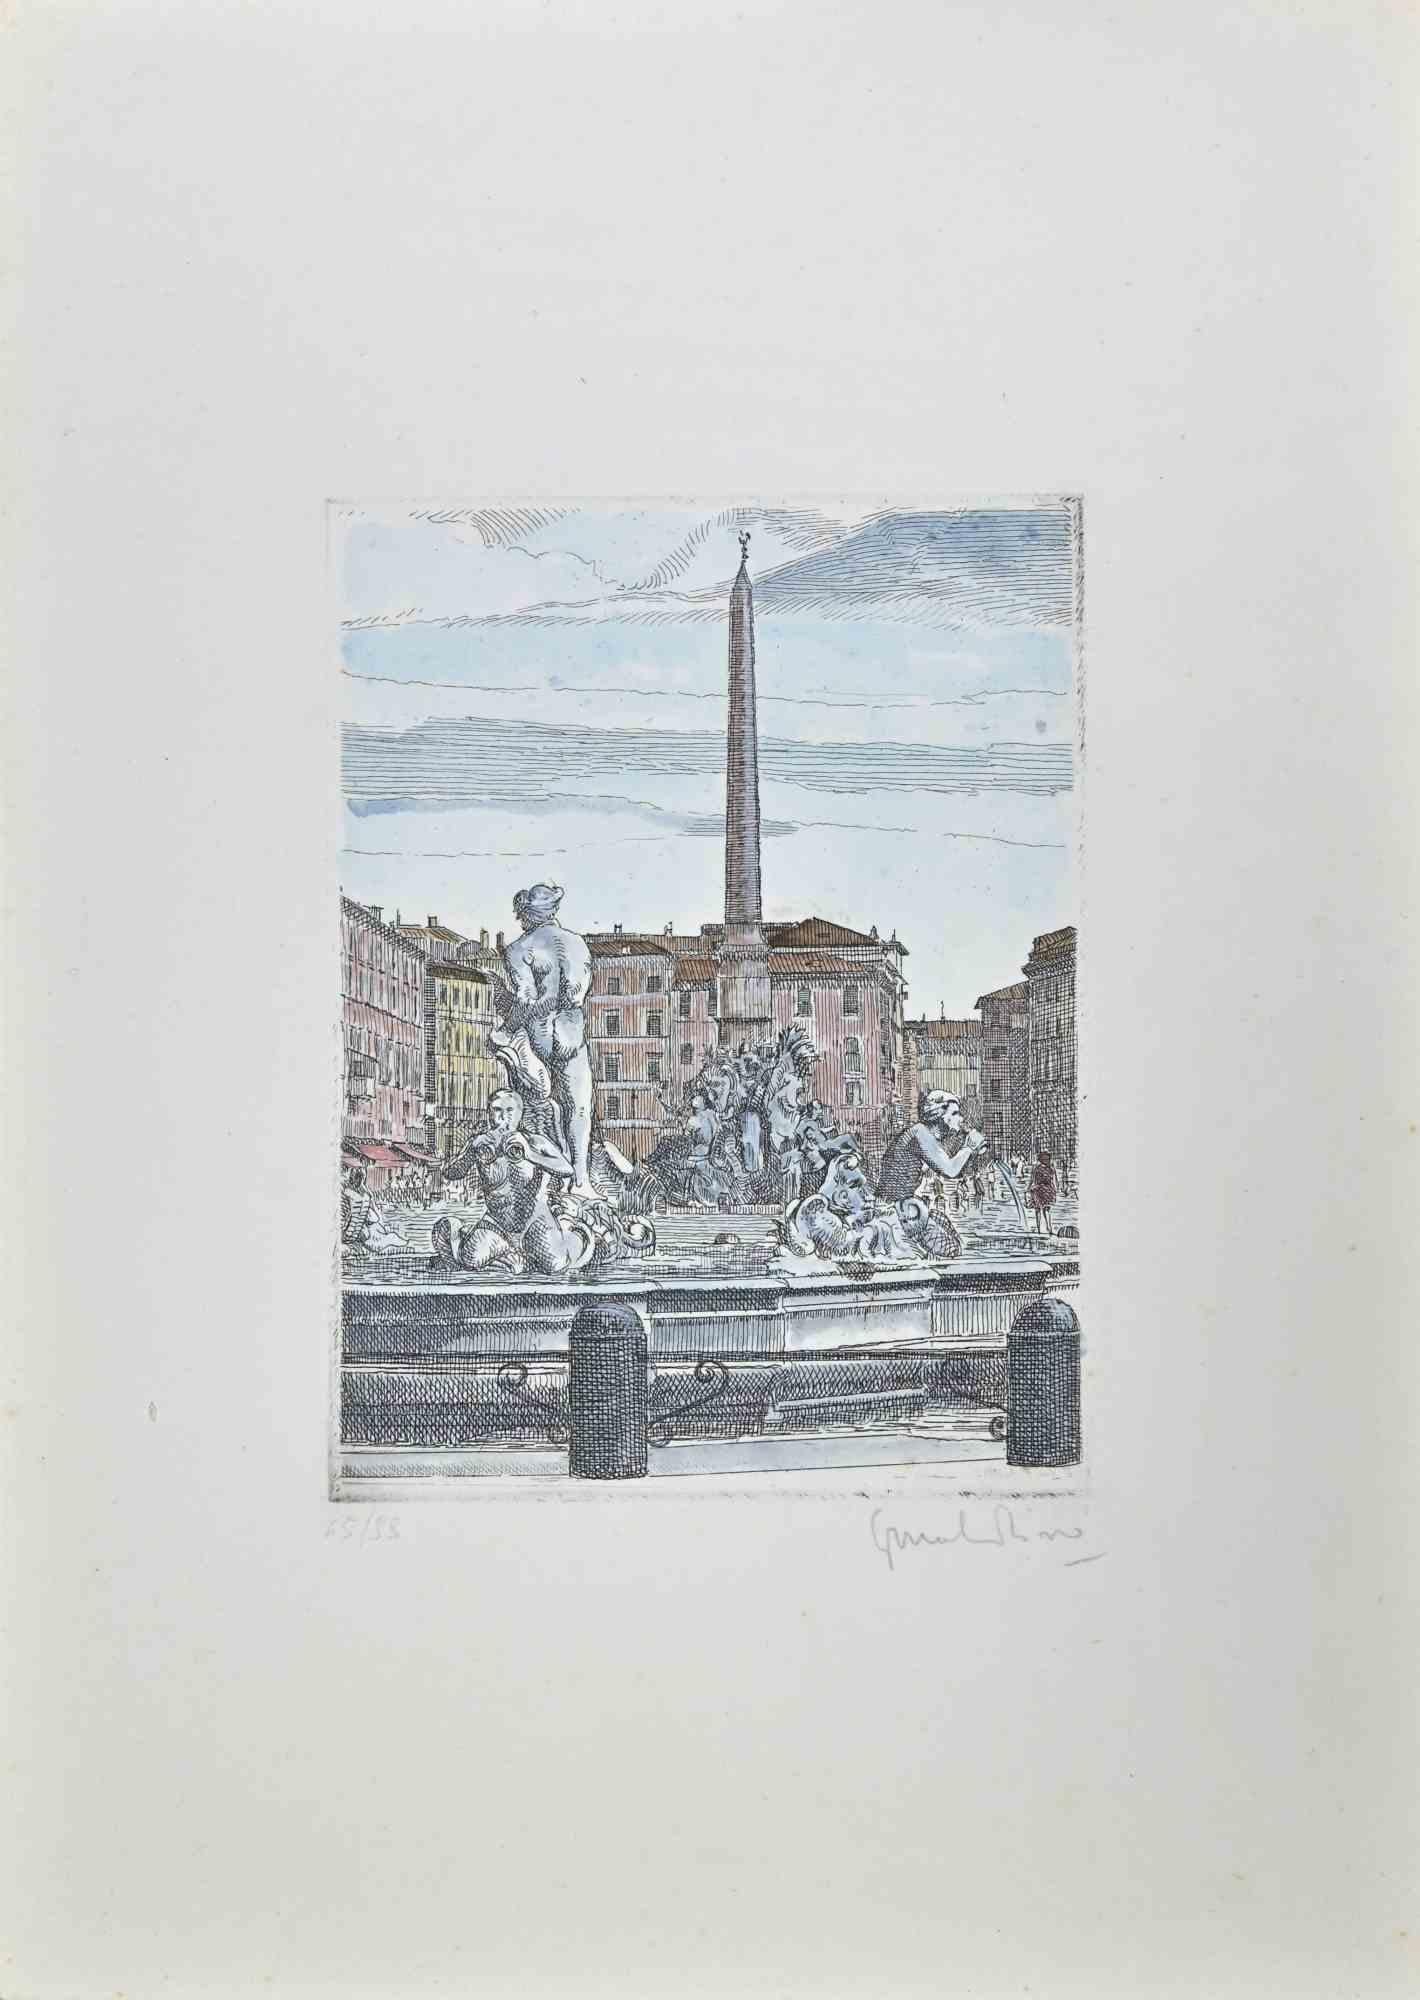 Navona Square is an etching realized in the  1960s by Giuseppe Malandrino .

Original hand-colored print.

Hand-signed by the artist in pencil on the lower right corner.

Numbered, edition 65/99.

Good conditions.

This artwork shows a glimpse of